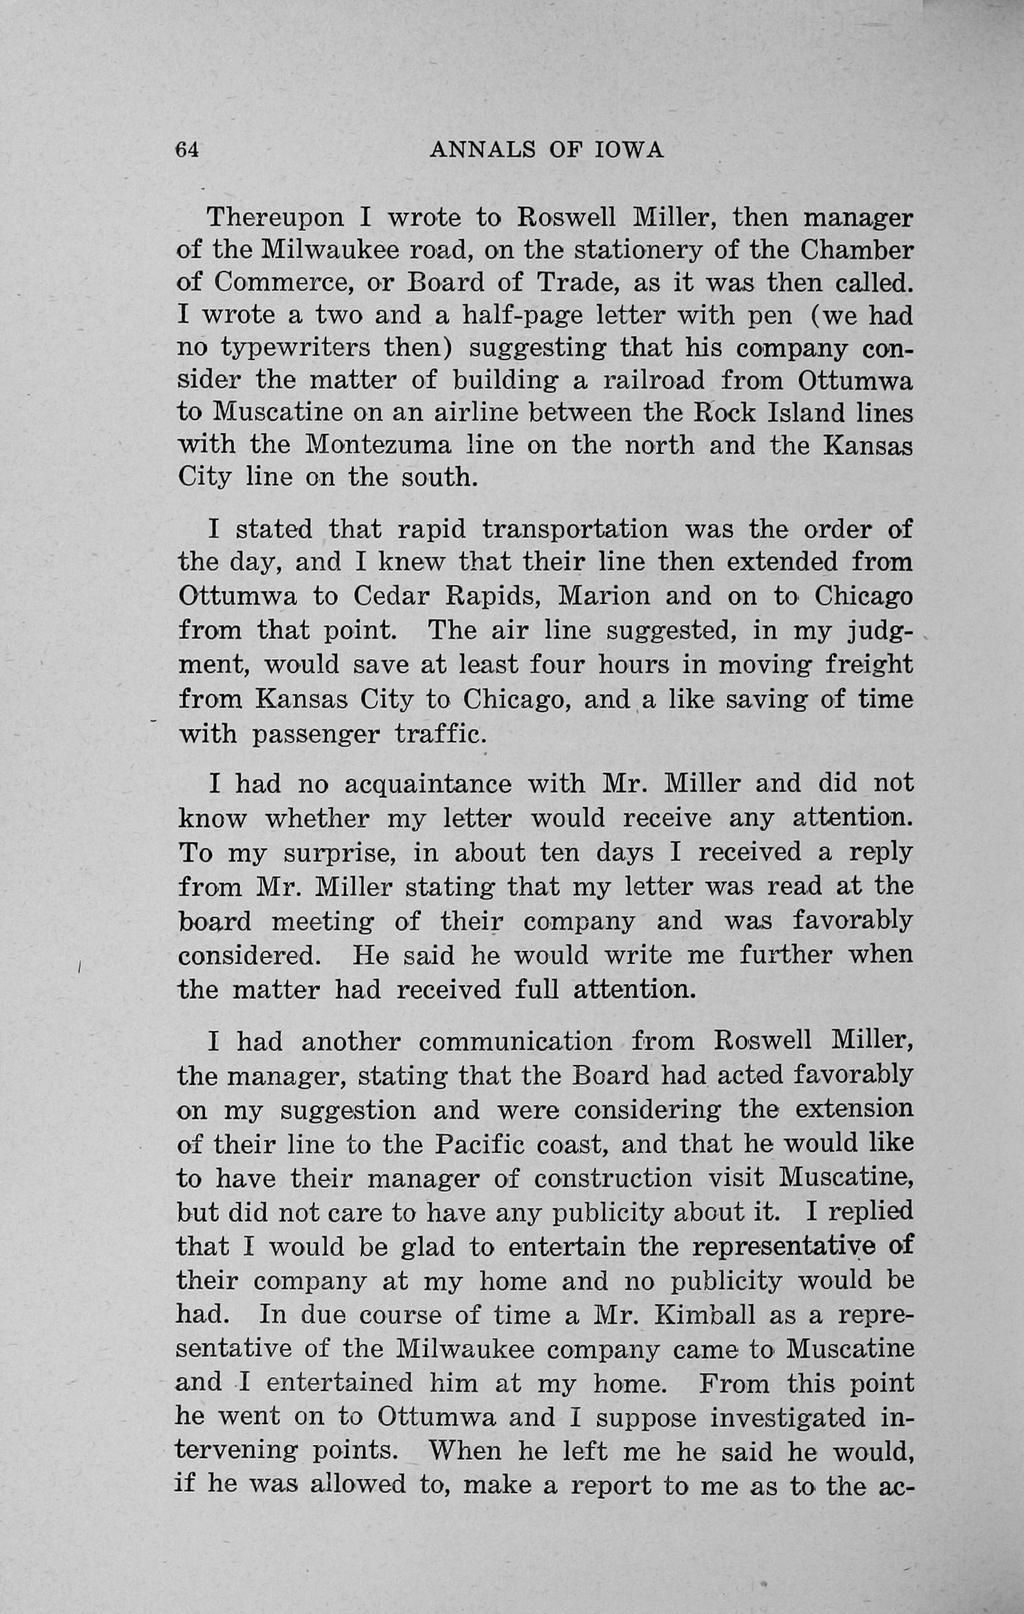 64 ANNALS OF IOWA Thereupon I wrote to Roswell Miller, then manager of the Milwaukee road, on the stationery of the Chamber of Commerce, or Board of Trade, as it was then called.